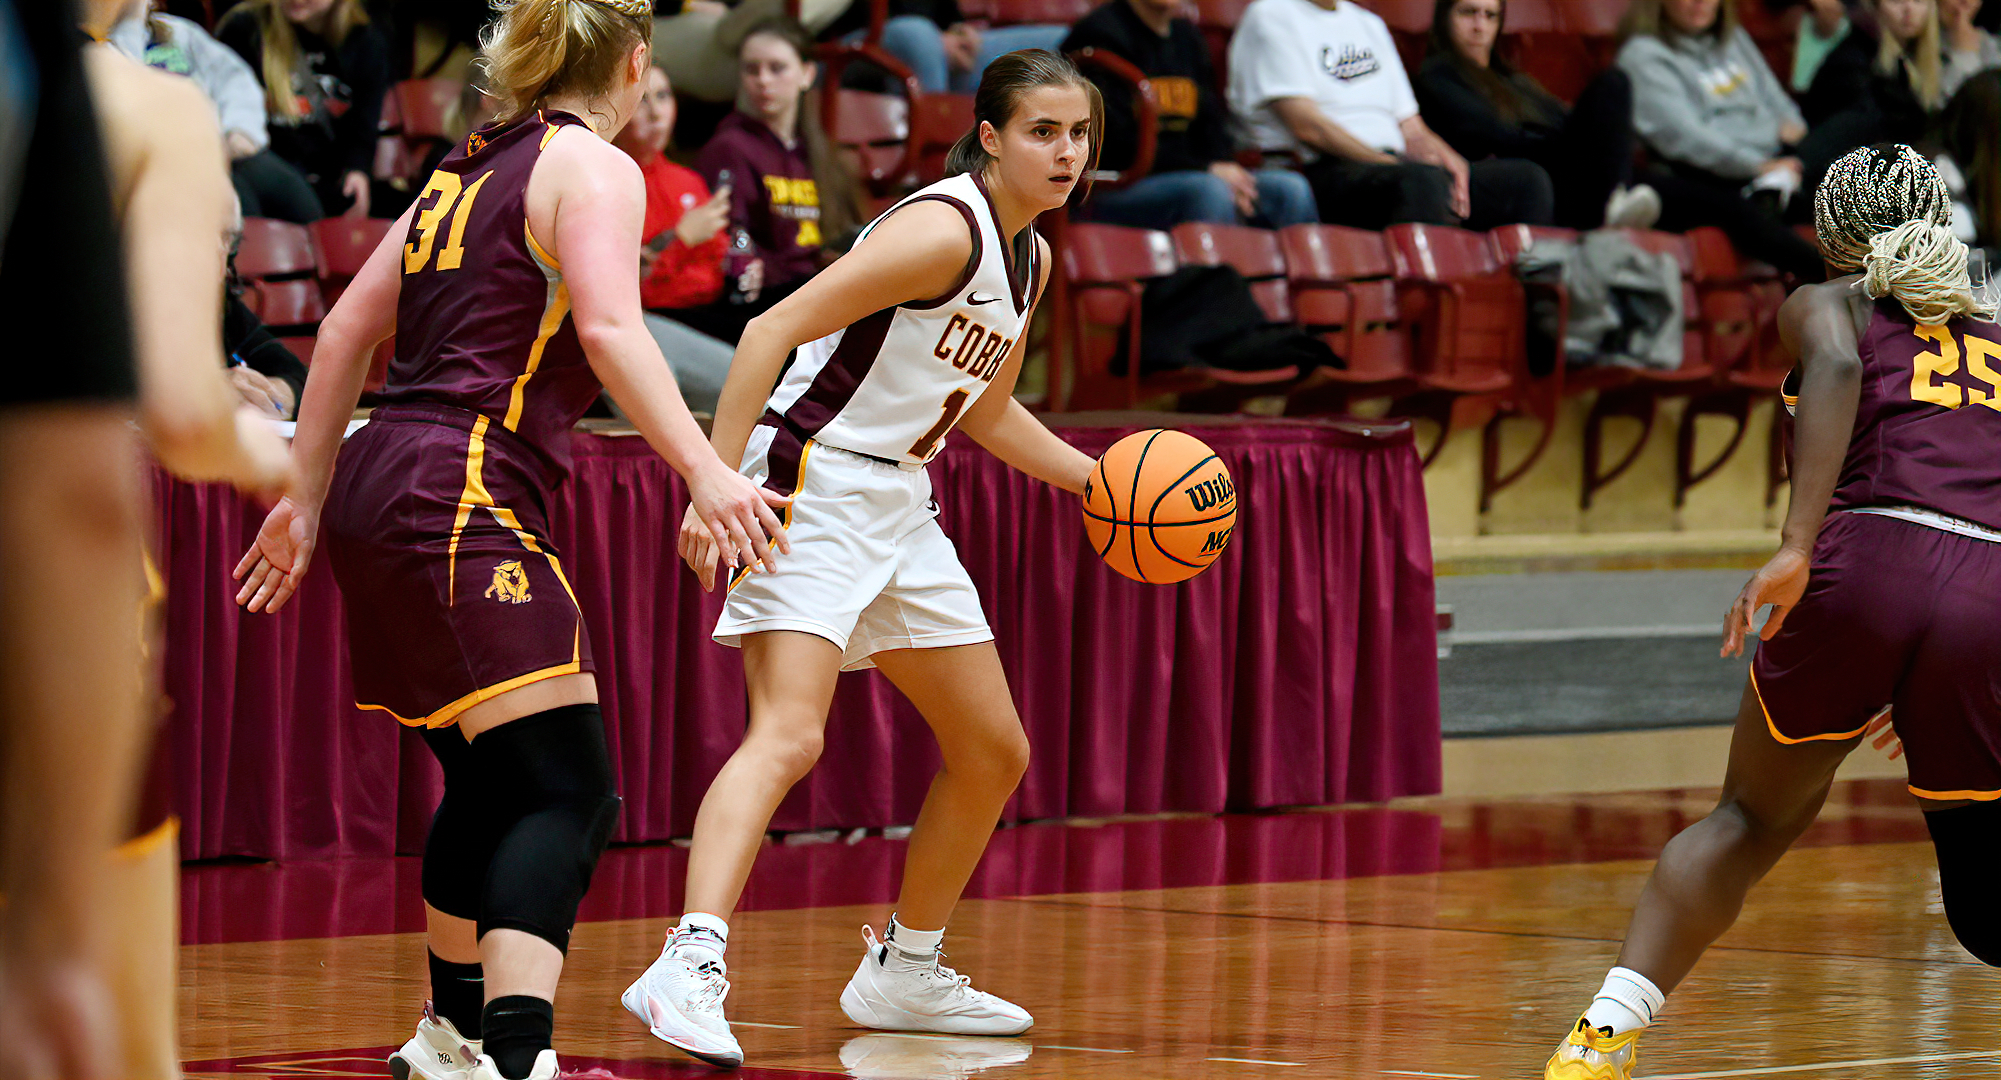 Junior Carlee Sieben eyes the court during the Cobbers' season opener with Minn.-Morris. She finished with a game-high 22 points.